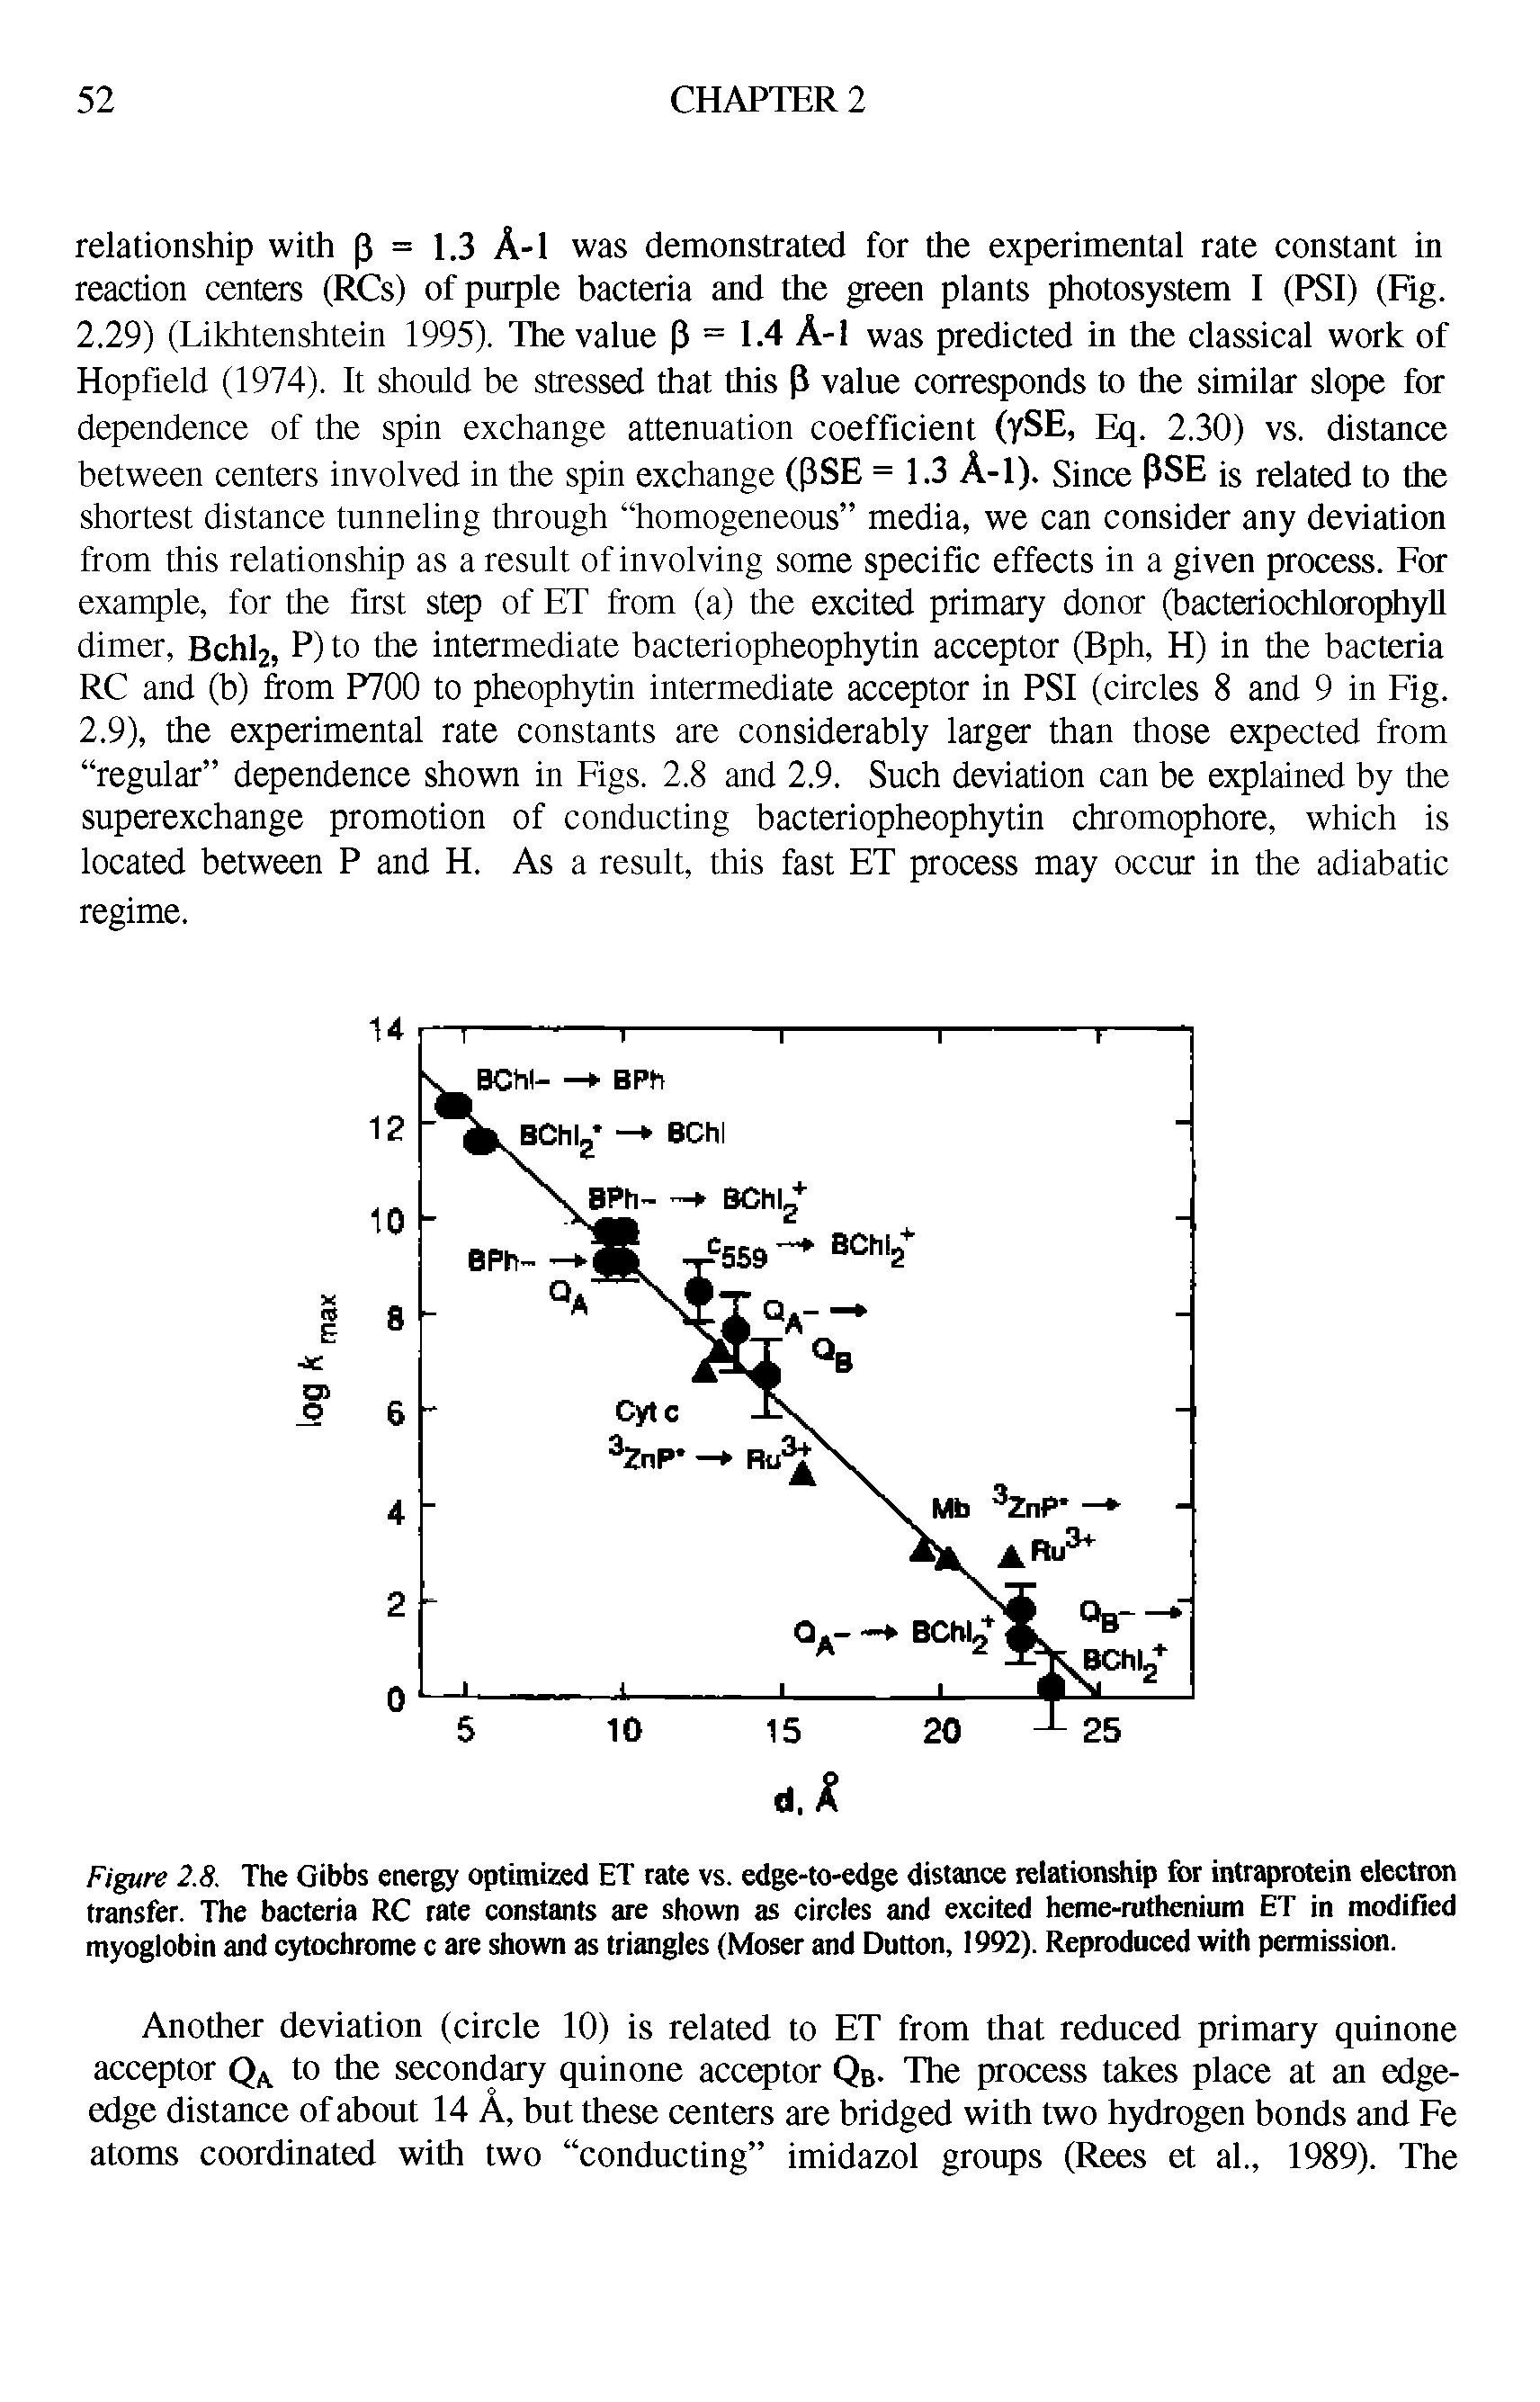 Figure 2.8. The Gibbs energy optimized ET rate vs. edge-to-edge distance relationship for intraprotein electron transfer. The bacteria RC rate constants are shown as circles and excited heme-ruthenium ET in modified myoglobin and cytochrome c are shown as triangles (Moser and Dutton, 1992). Reproduced with permission.